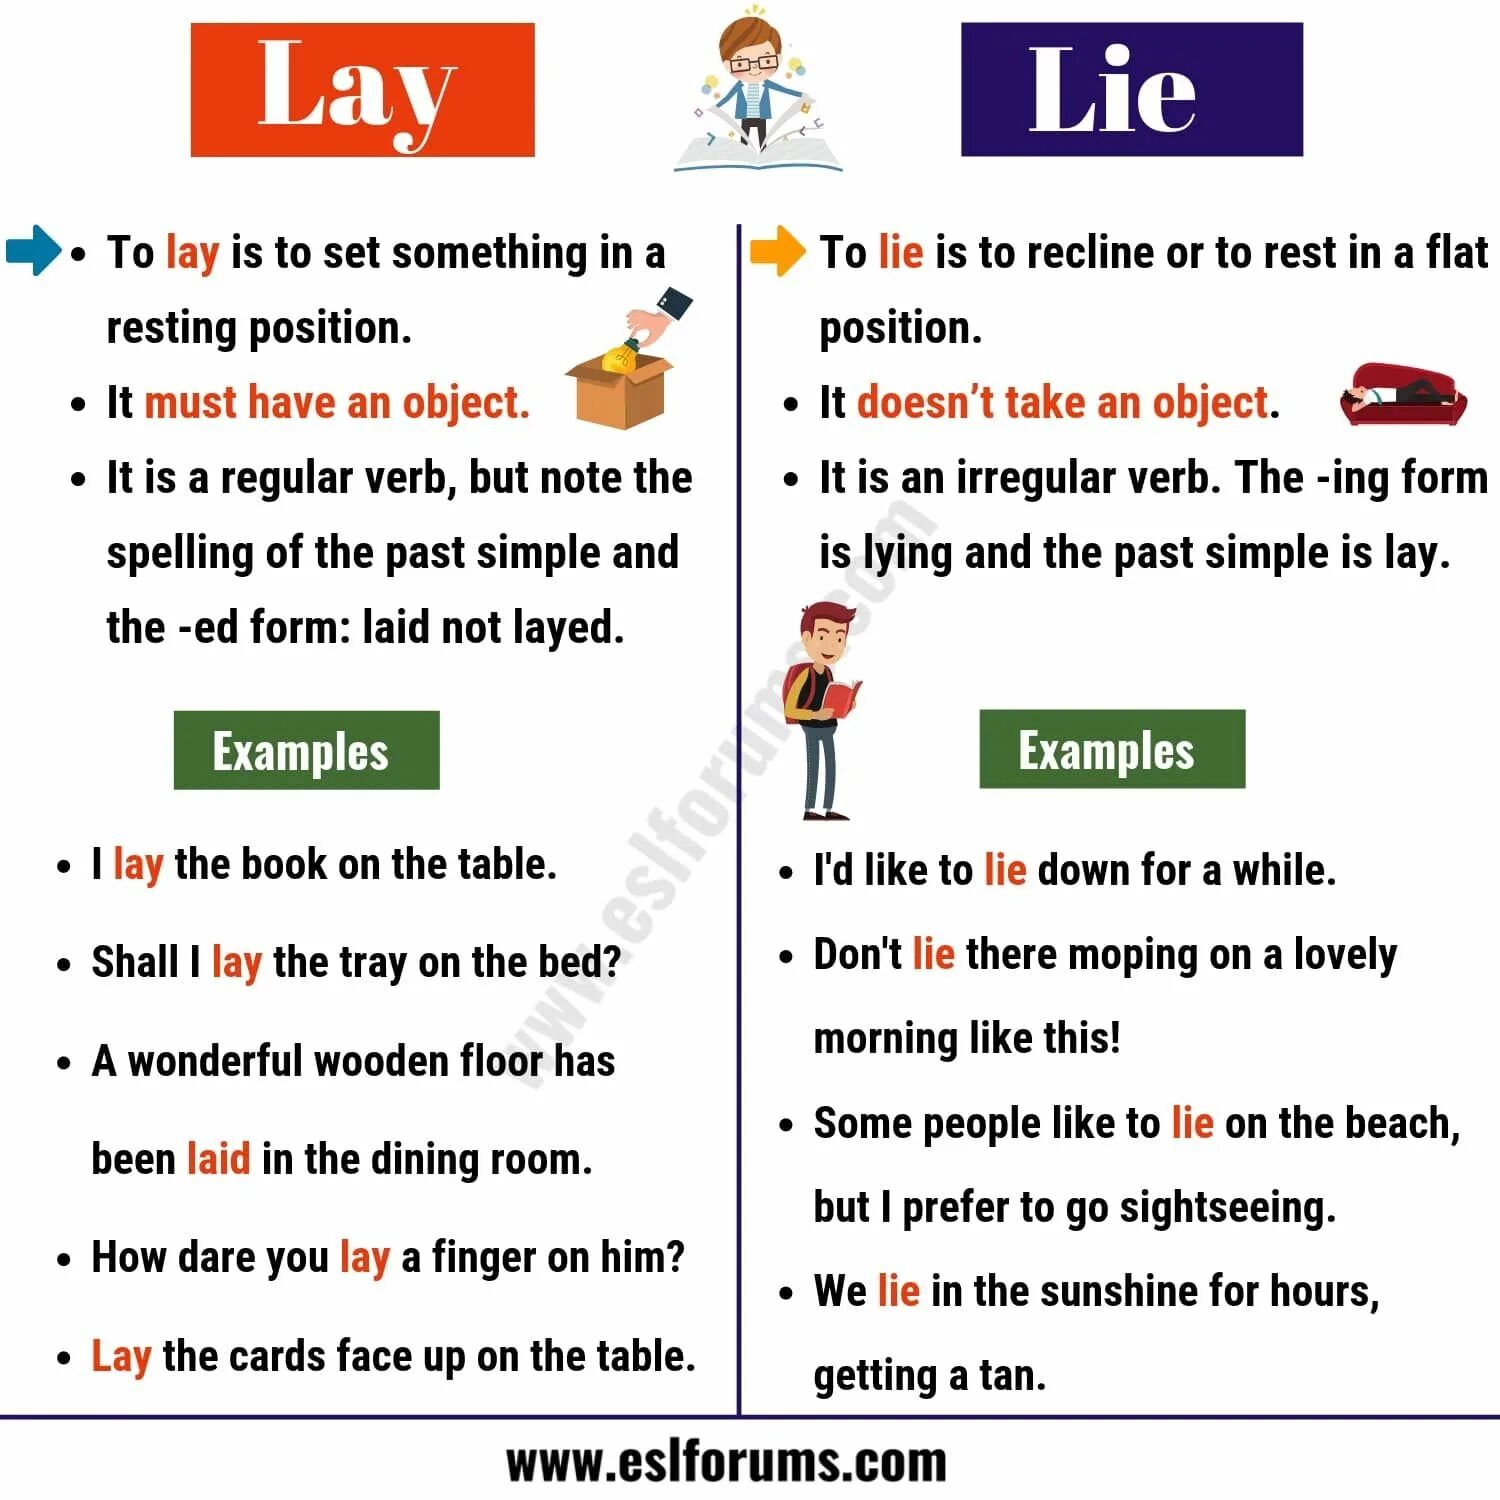 Lie lay разница. Laying lying разница. Lay или laid. Lie and lay difference.